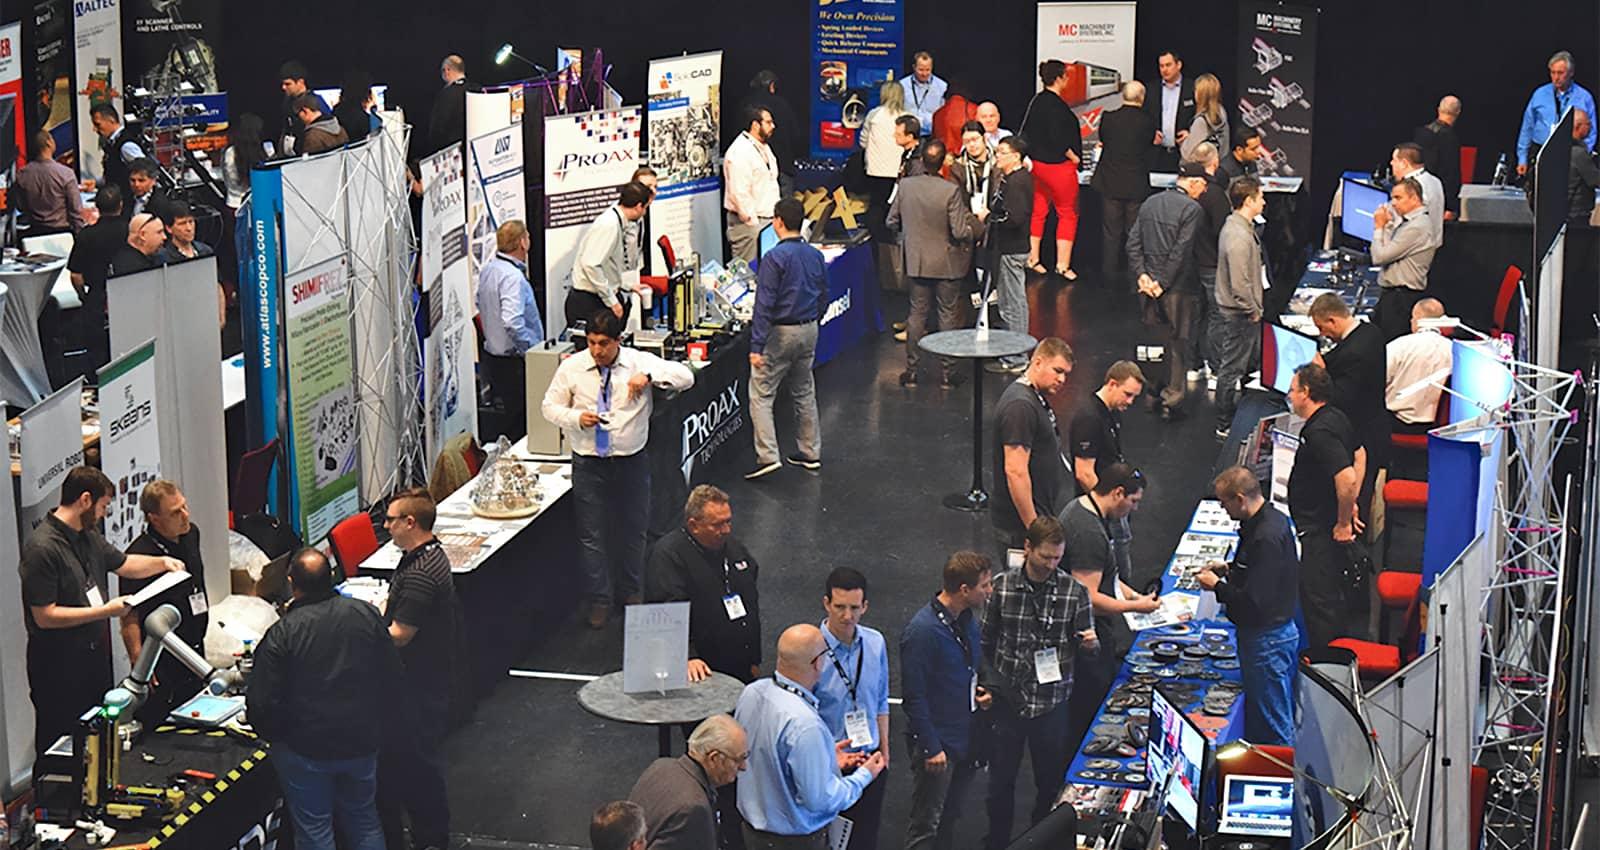 Showcase products and services at the Metalworking and Manufacturing Expo